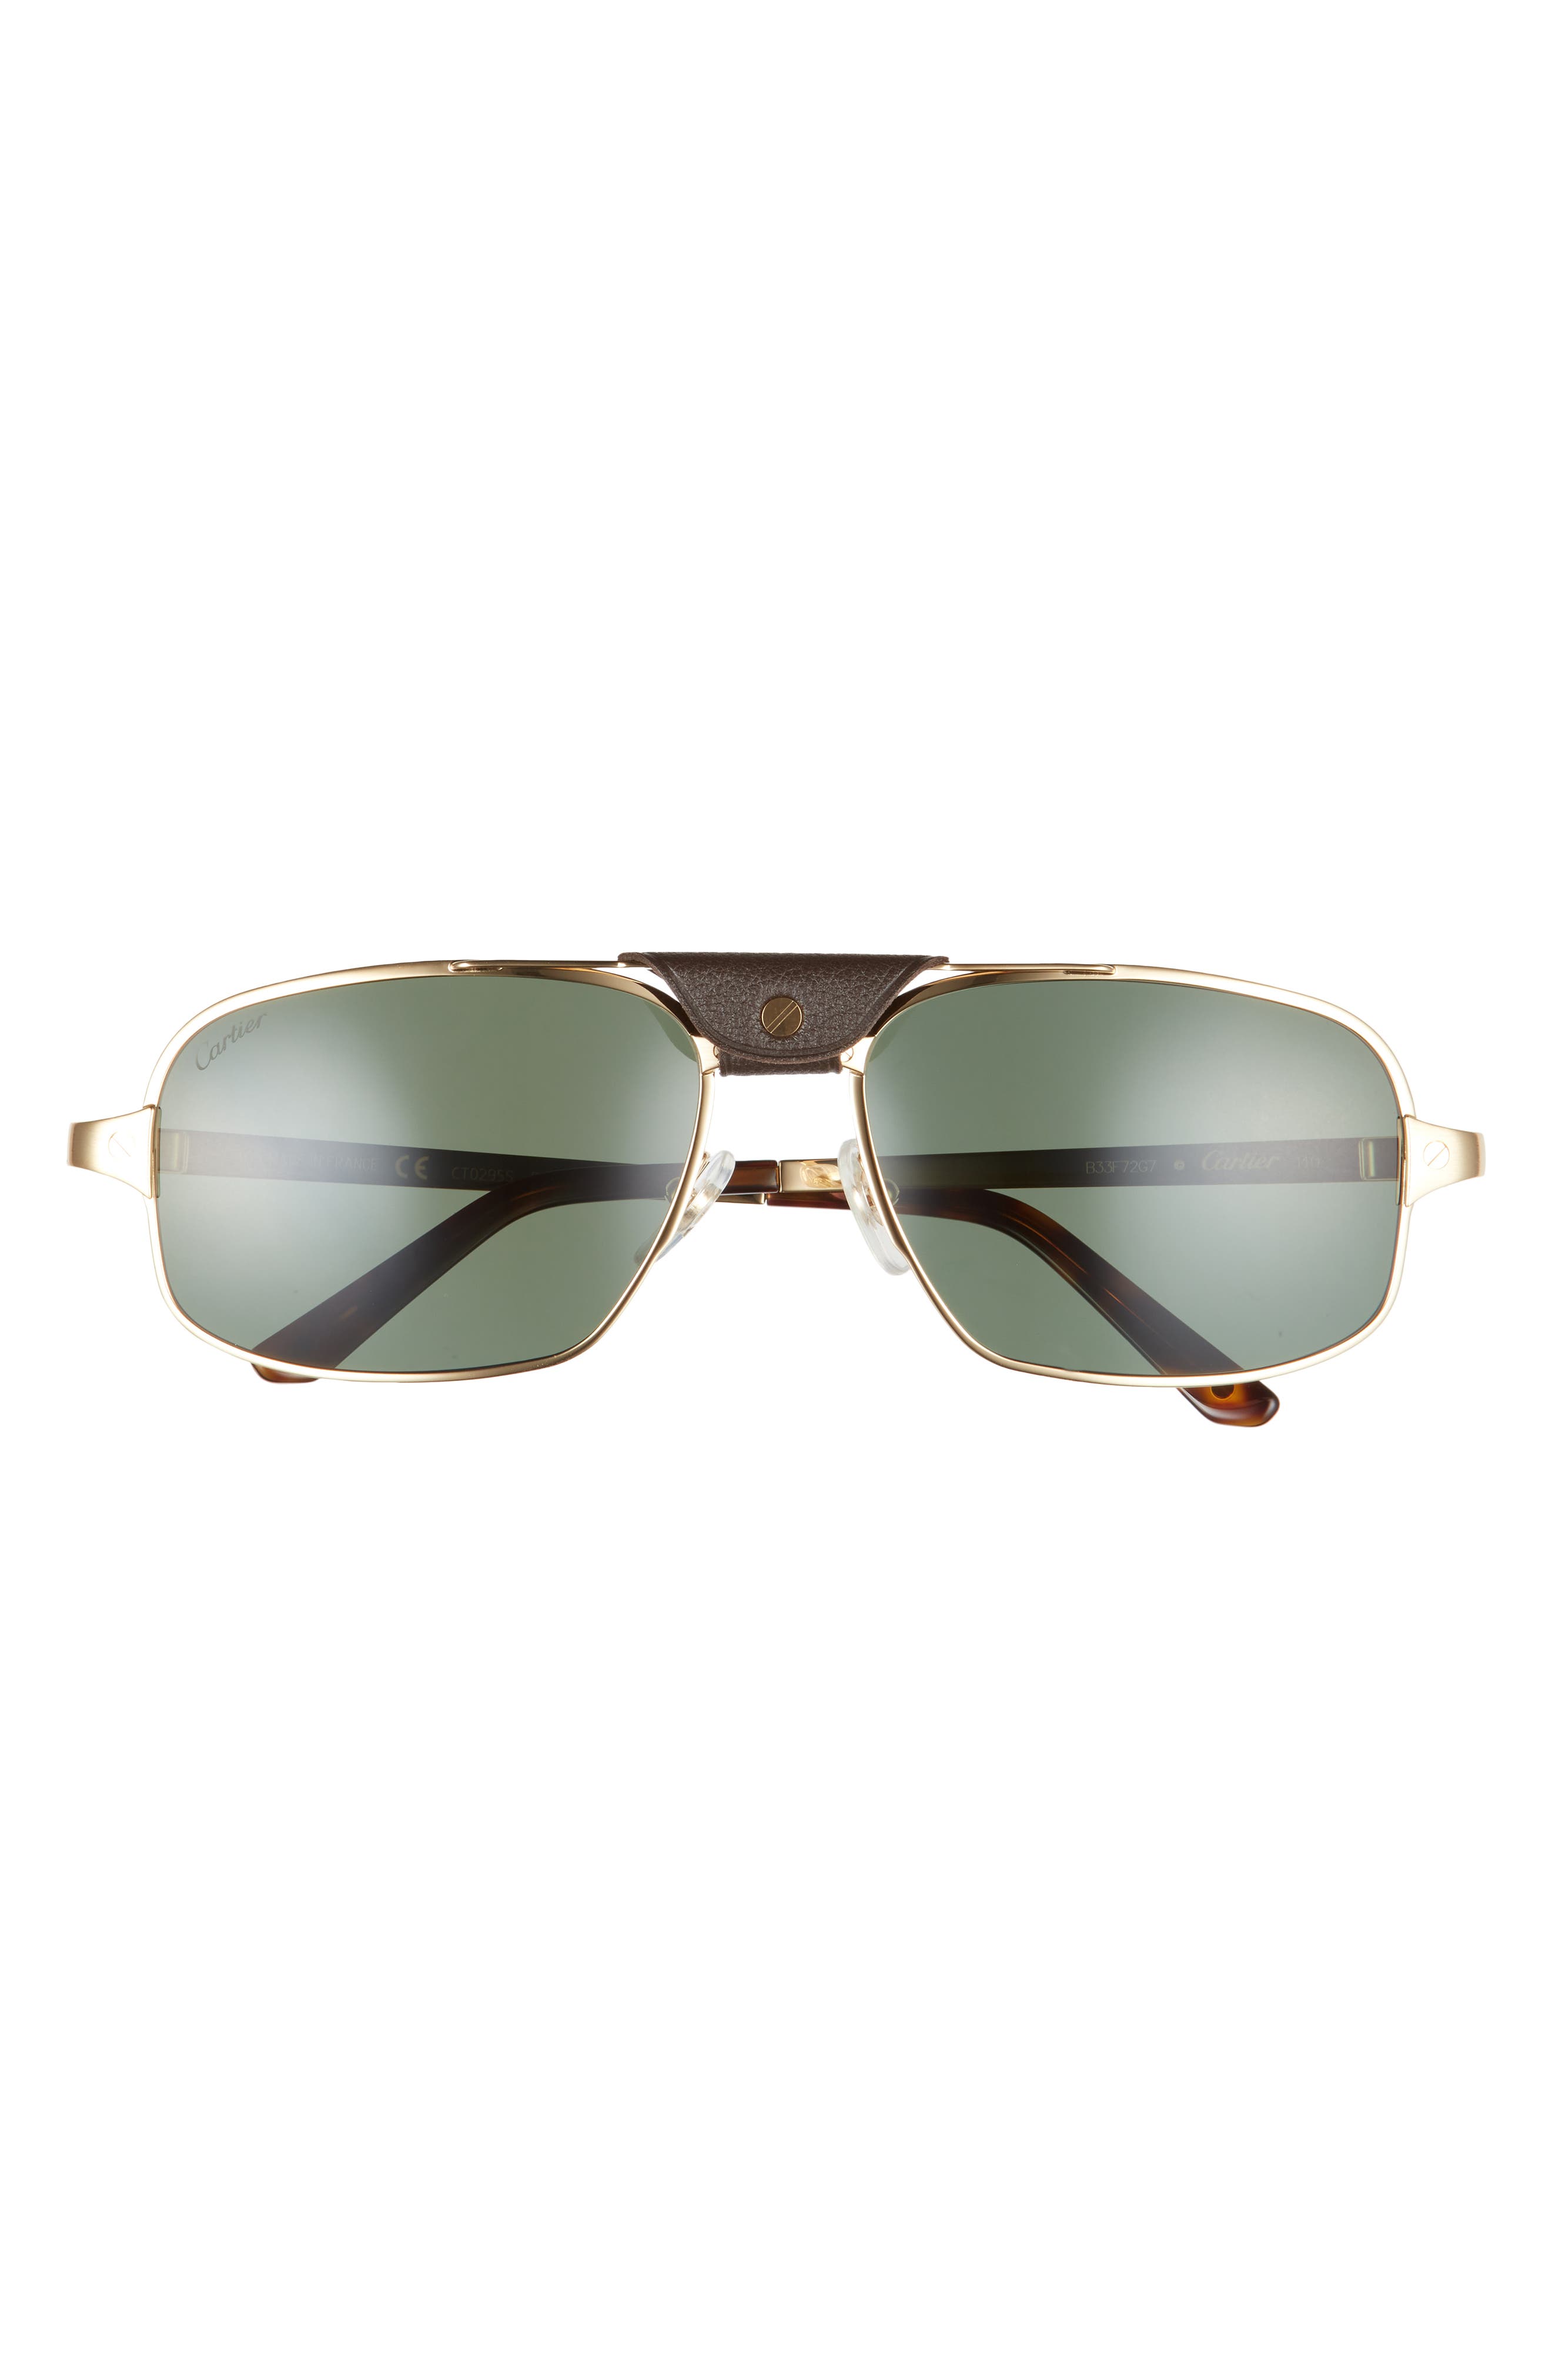 Cartier 60mm Polarized Aviator Sunglasses in Gold at Nordstrom